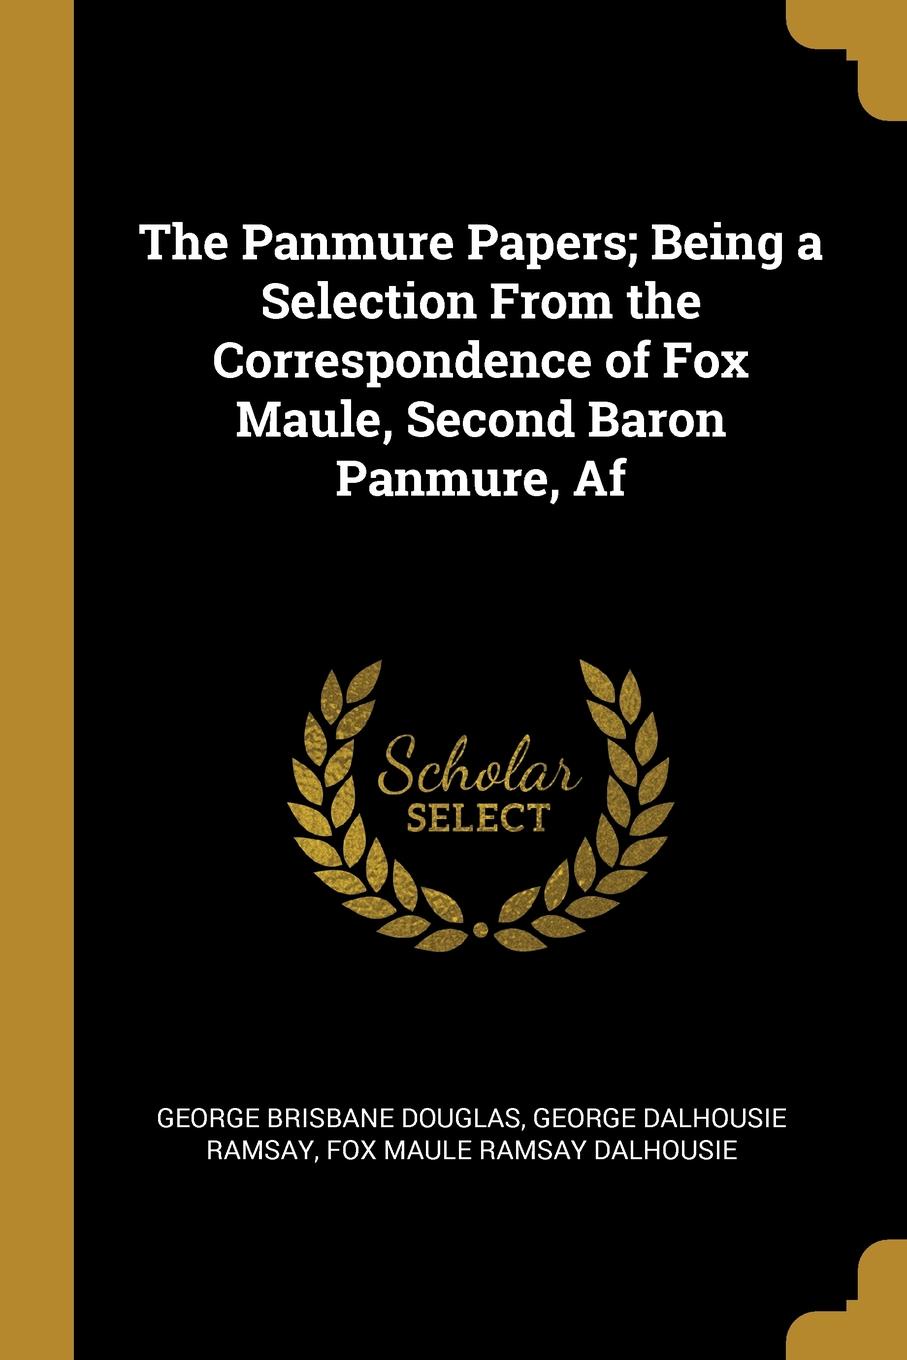 The Panmure Papers; Being a Selection From the Correspondence of Fox Maule, Second Baron Panmure, Af